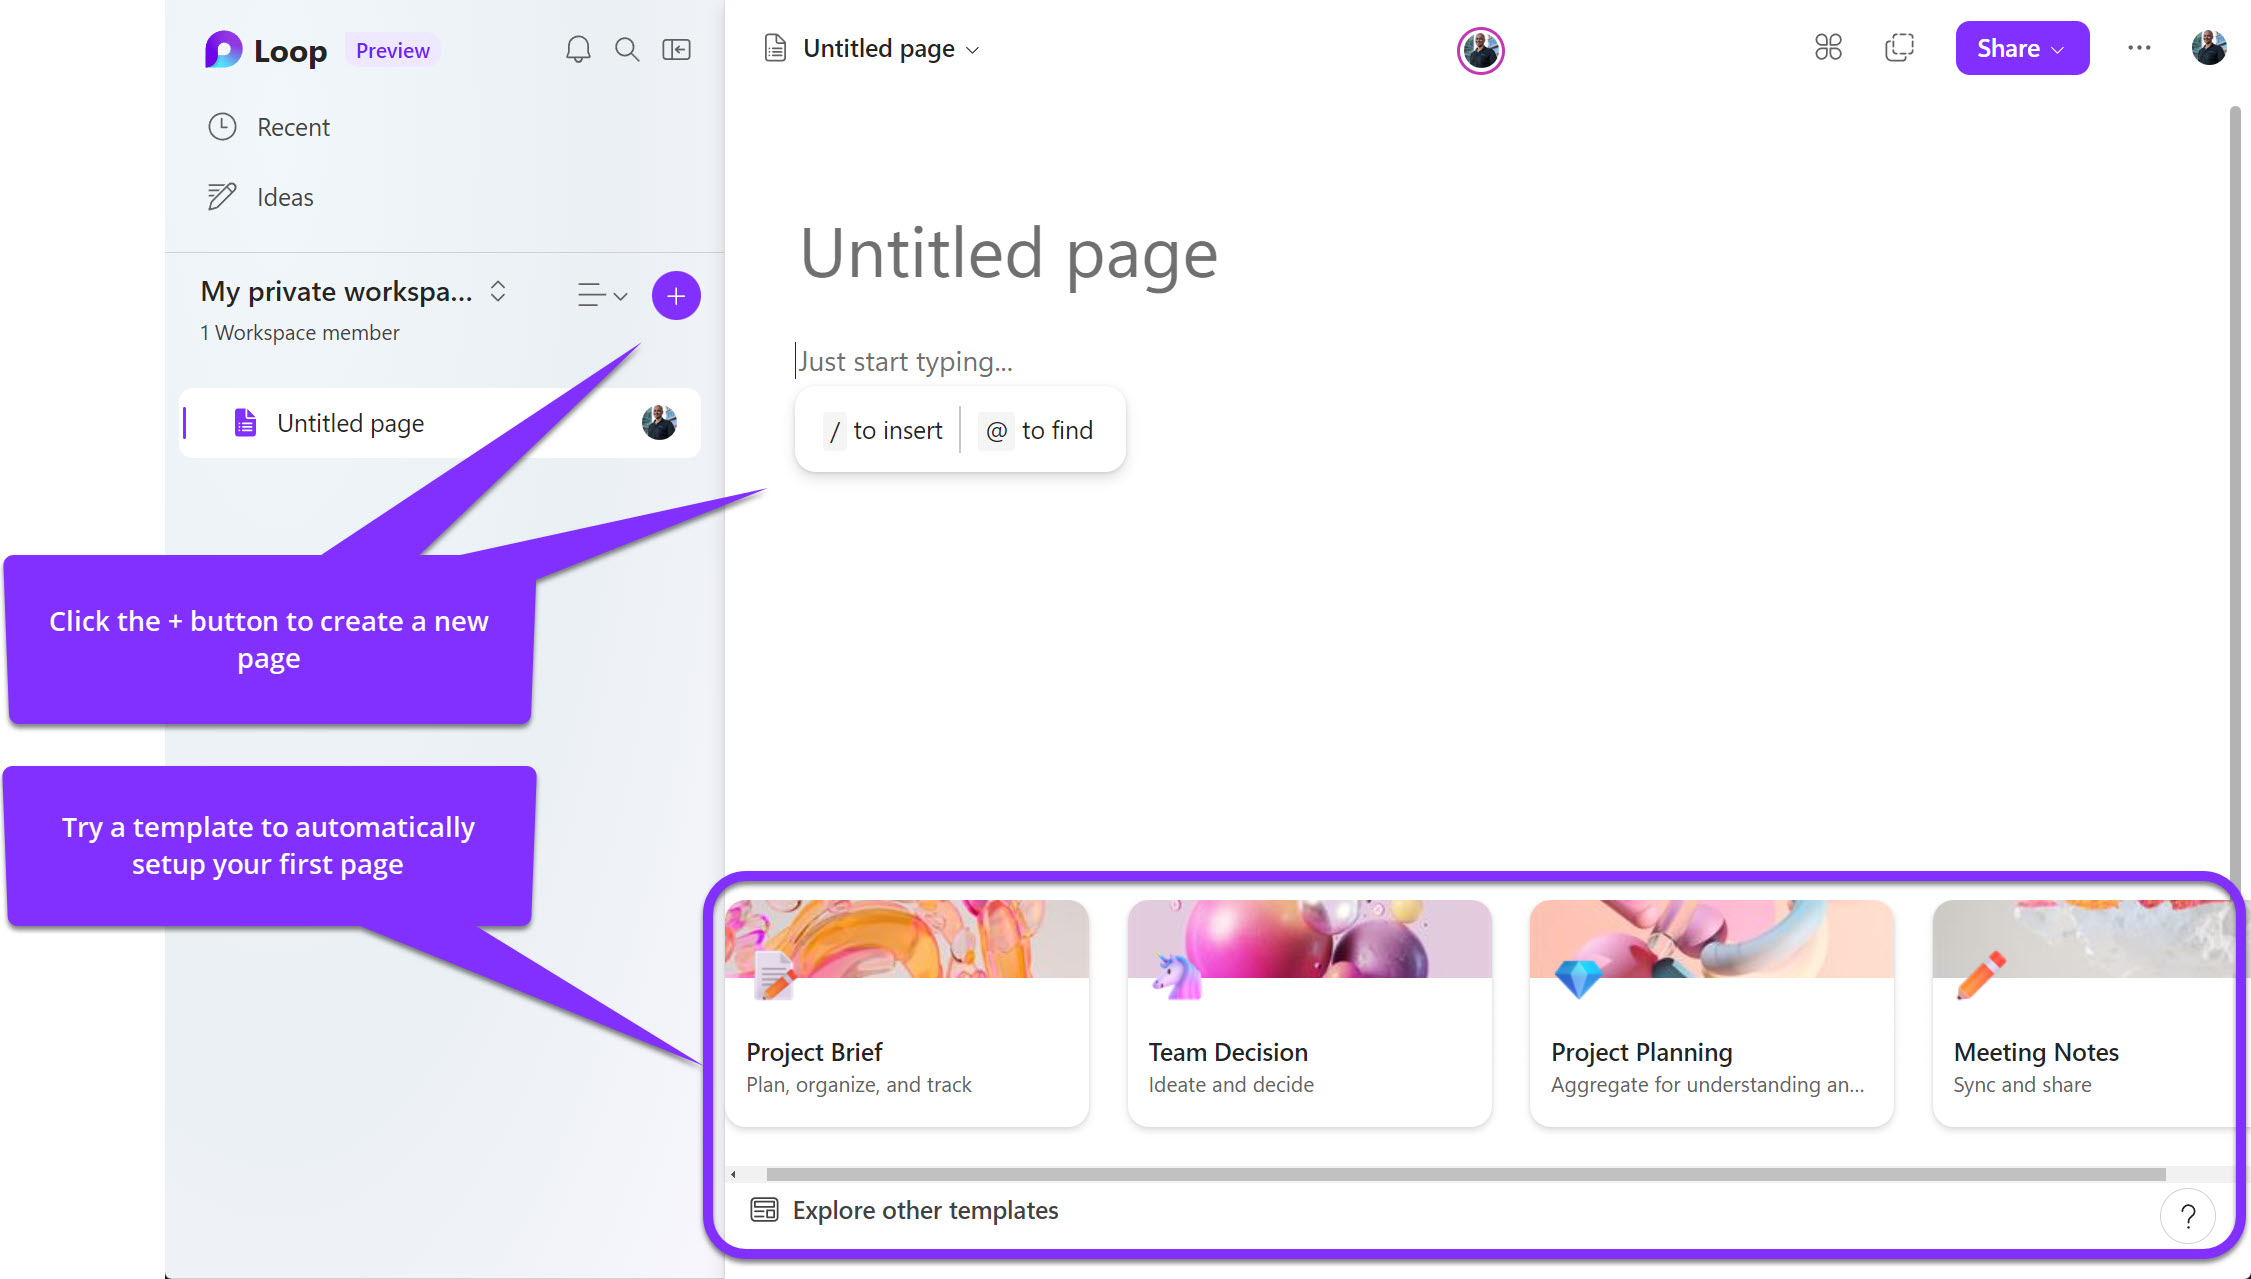 In your Loop workspace, click the "+" button to create a new page.  Then try one of the templates provided by Microsoft to get started